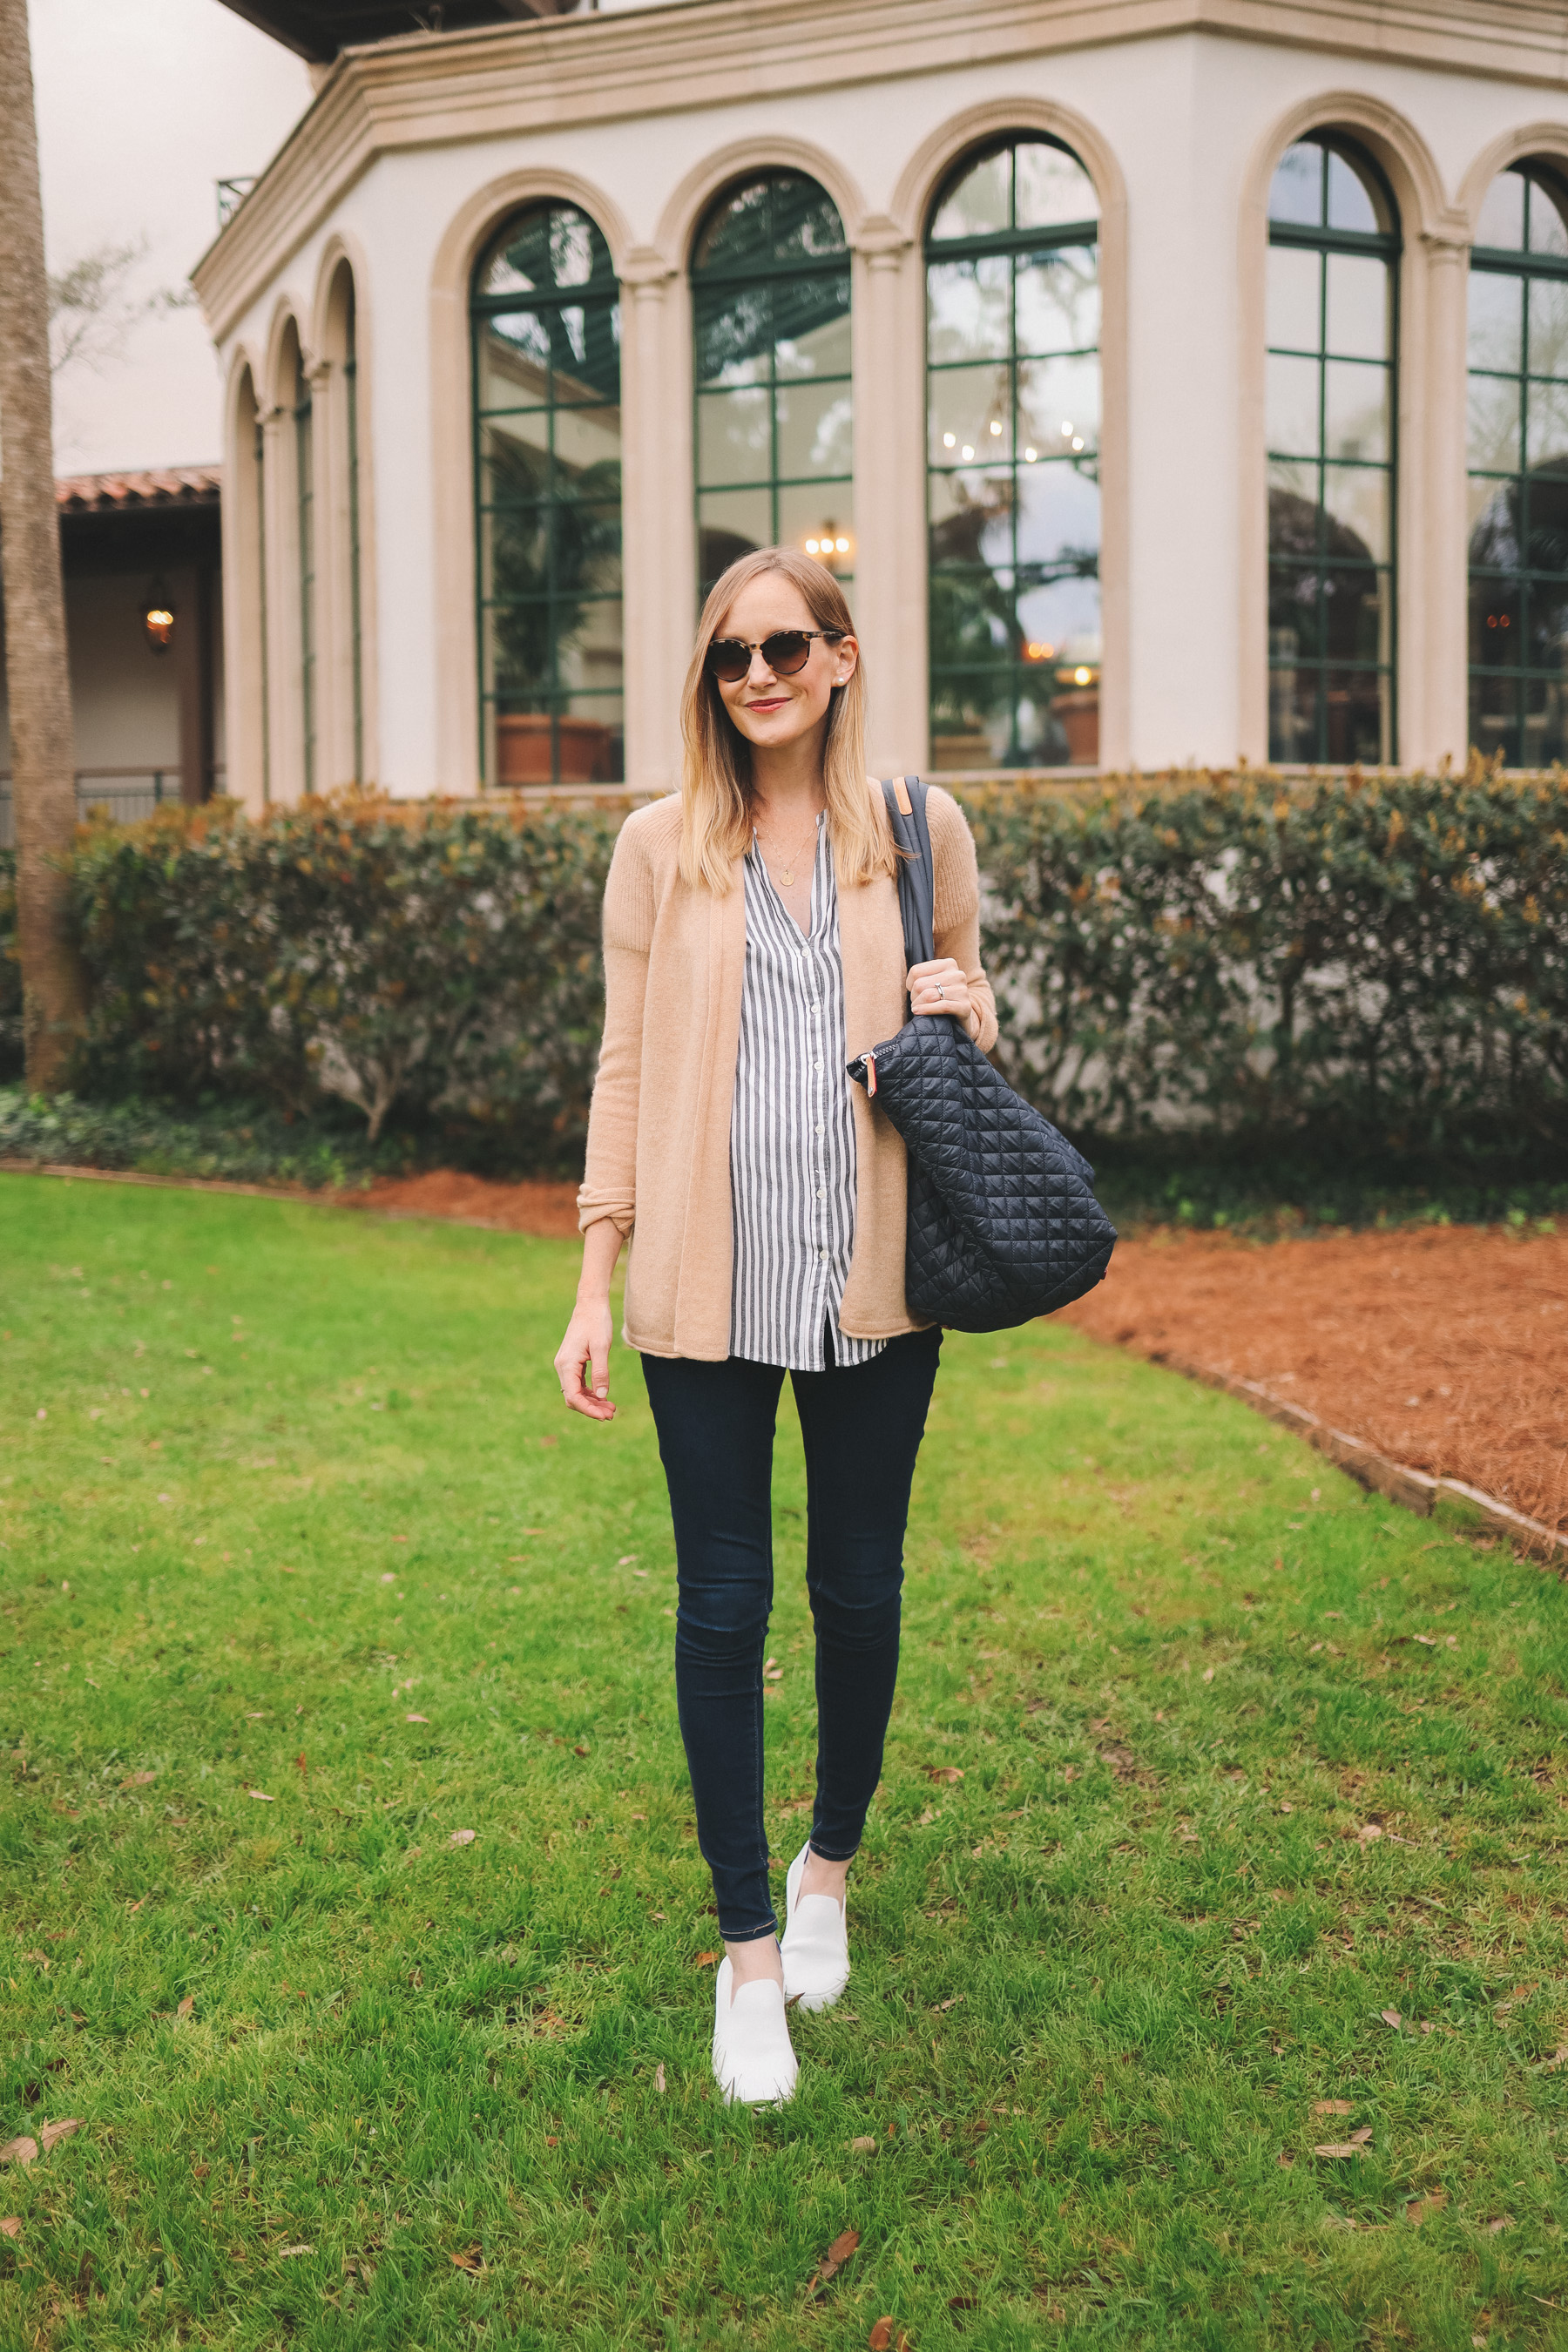 Kelly outfit details: Rothys Slip-On Sneaker Review / Old Navy Rockstar Jeans / Gap Striped Top / Lilly Pulitzer Cashmere Cardigan c/o